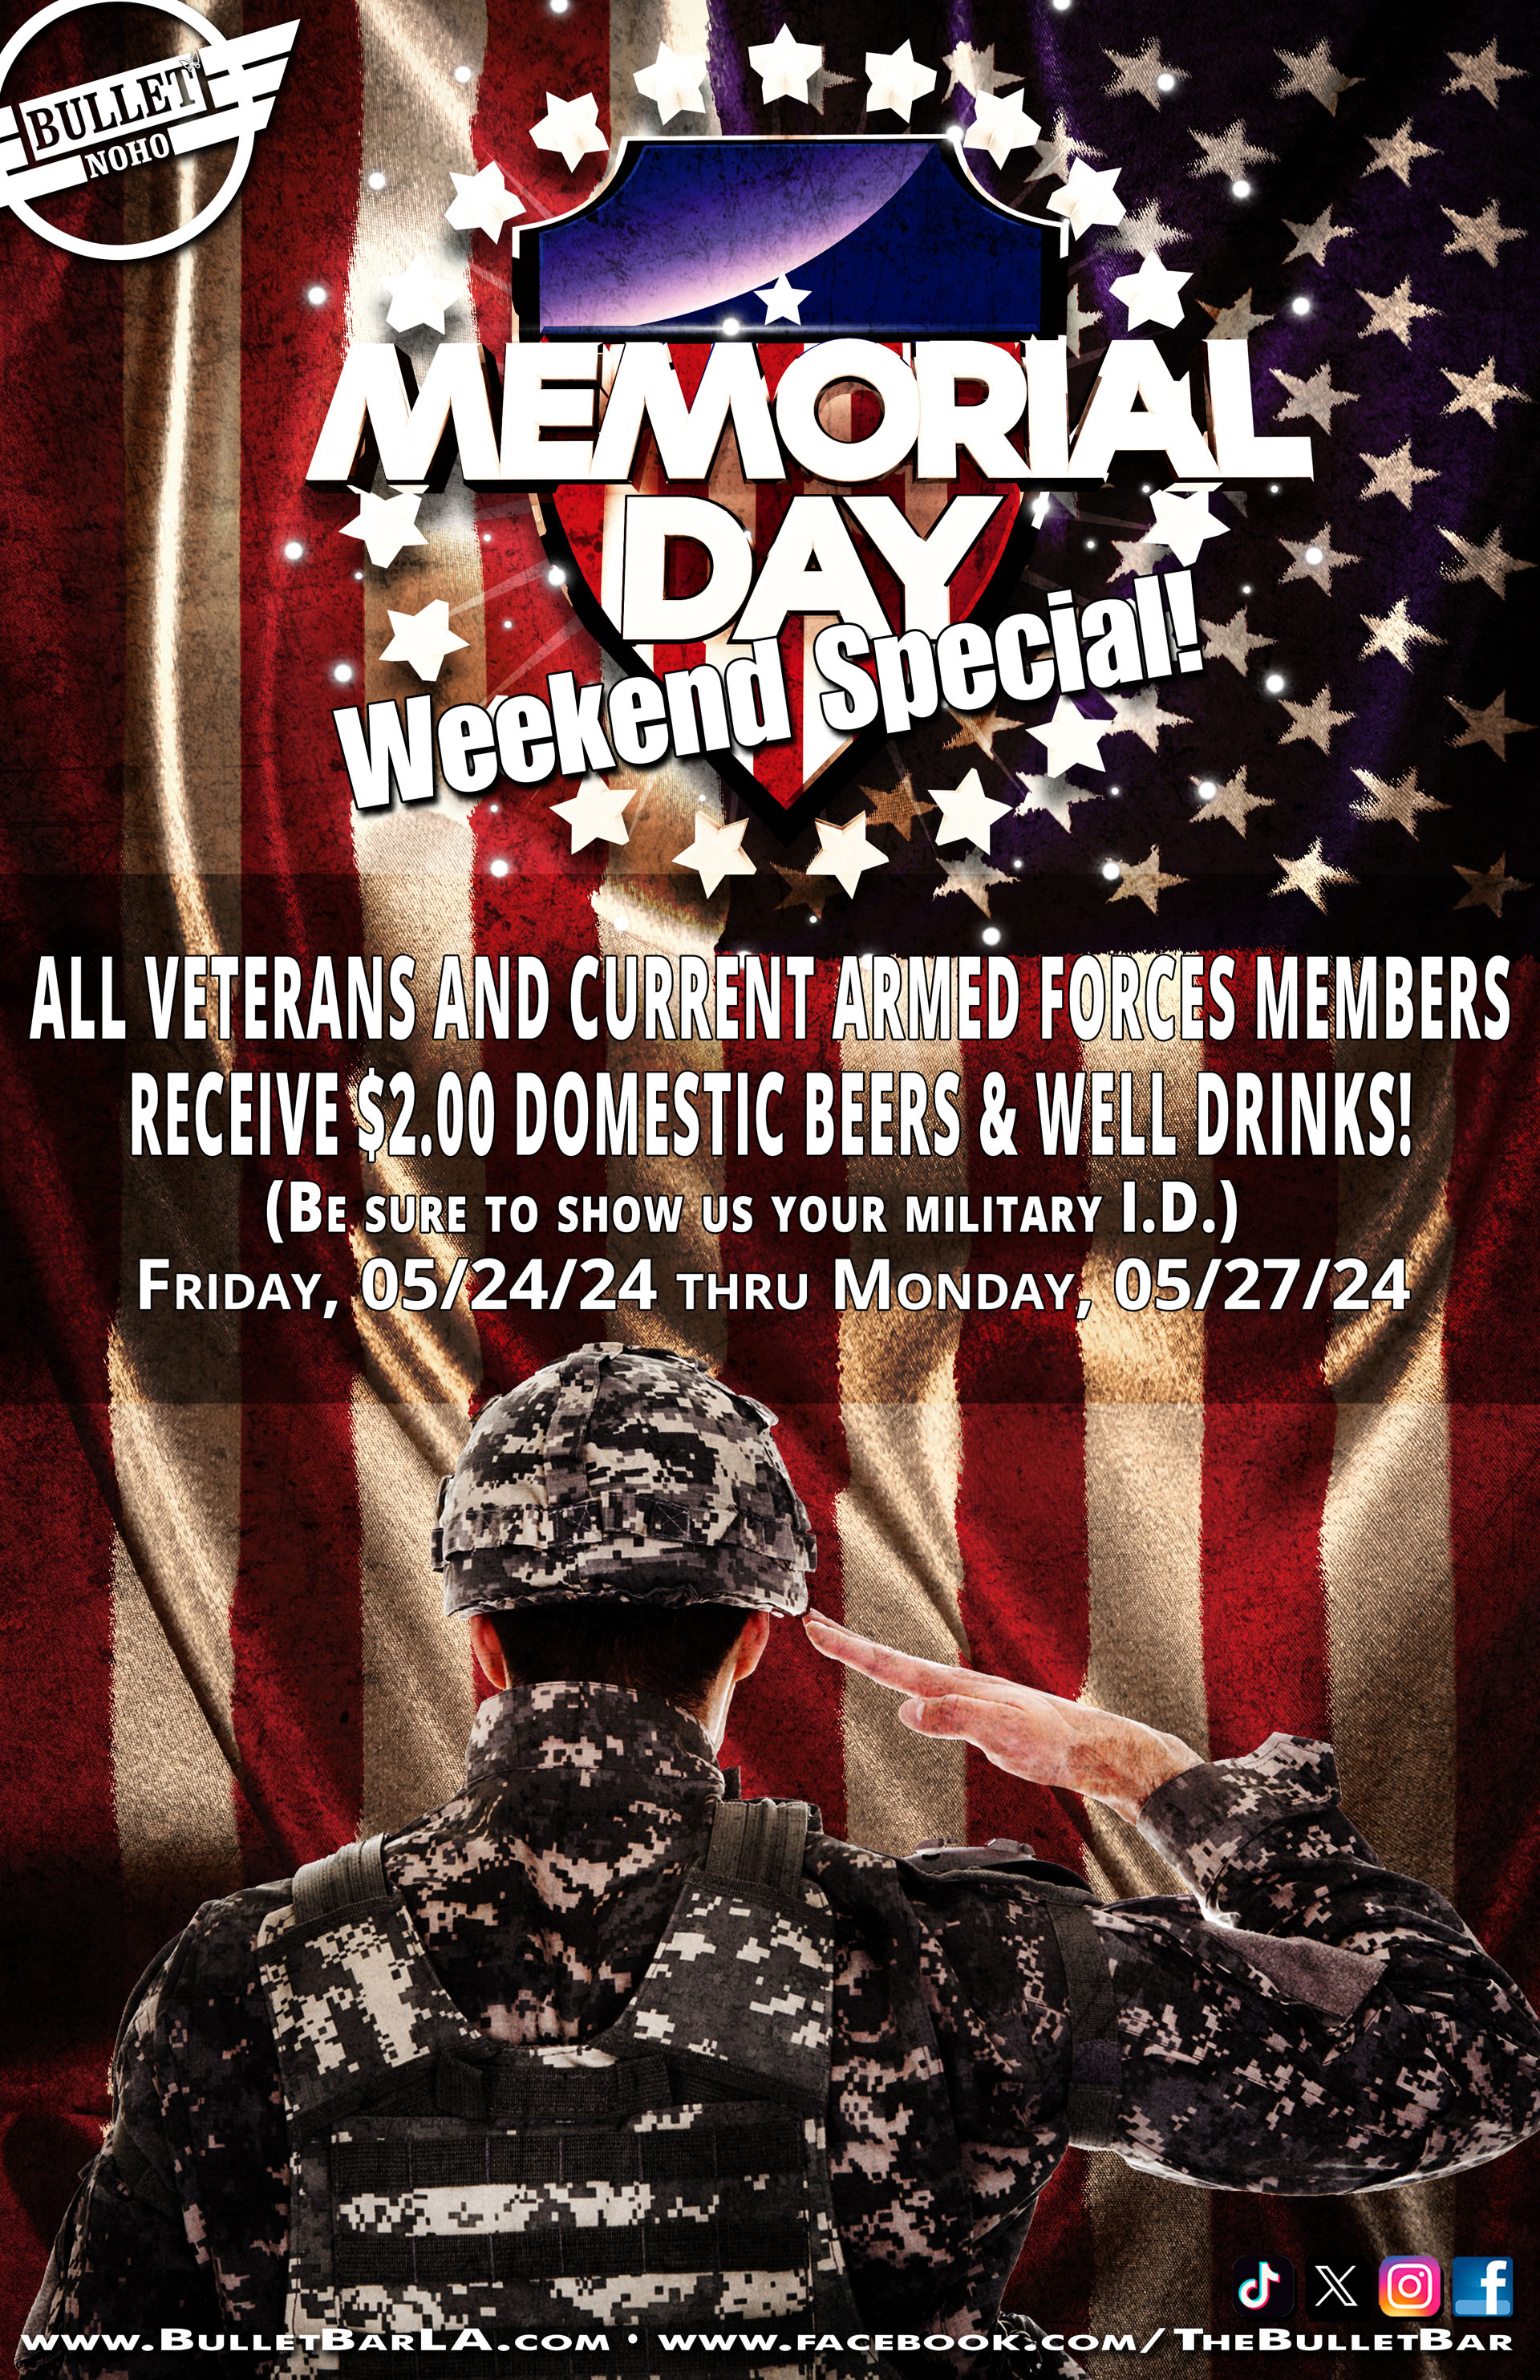 The Bullet Bar Salutes Our Veterans and All Current Armed Forces Members During Memorial Day Weekend by Showing Us Your Military I.D. and You'll Receive $2.00 Domestic Beers and Well Drinks: May 26th thru 29th, 2023!